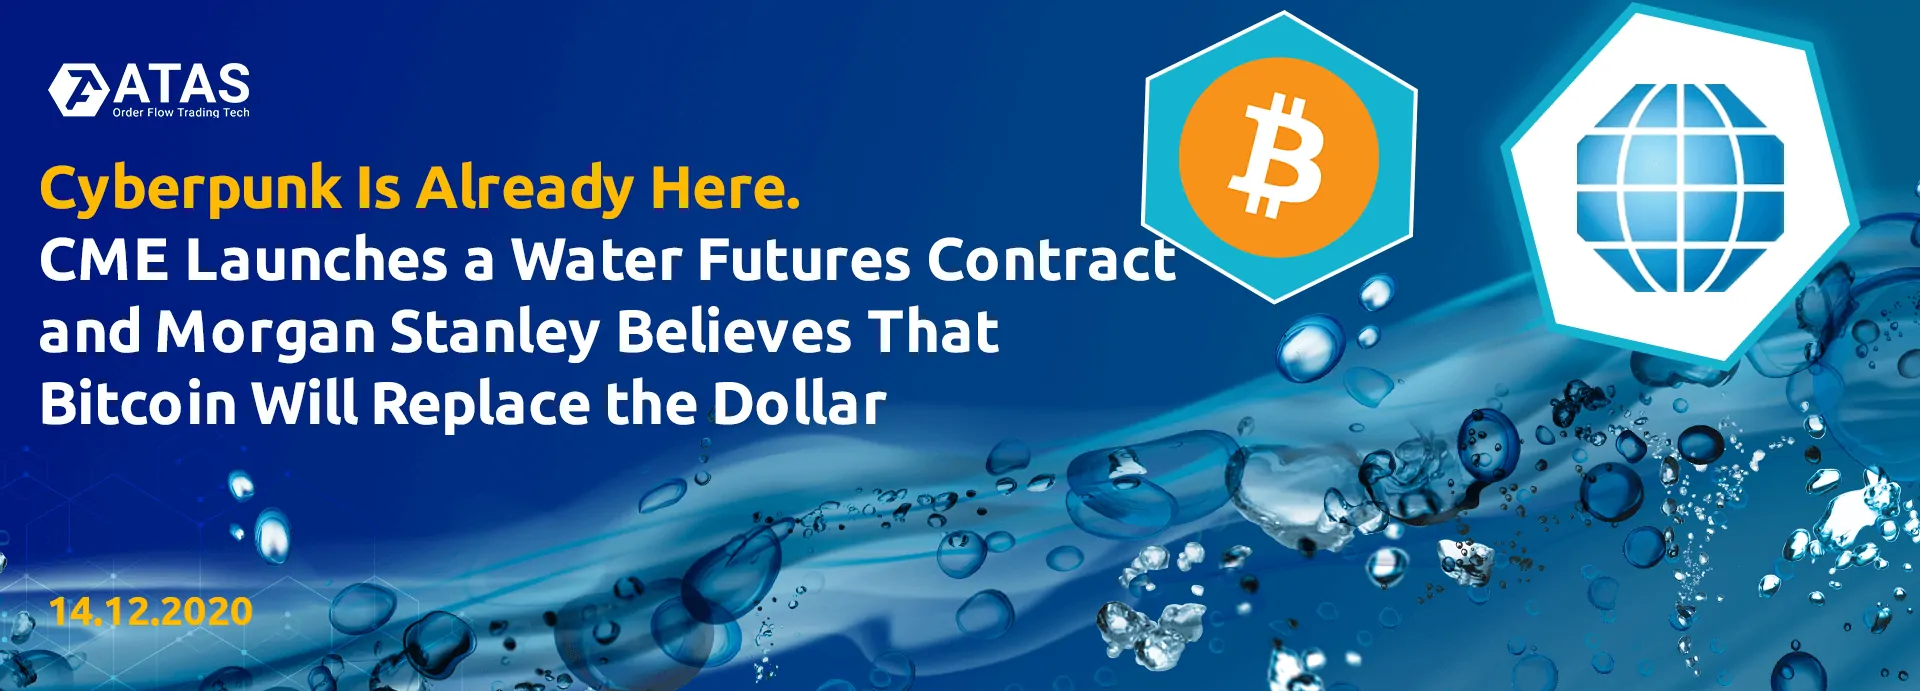 Cyberpunk Is Already Here. CME Launches a Water Futures Contract And Morgan Stanley Believes That Bitcoin Will Replace the Dollar